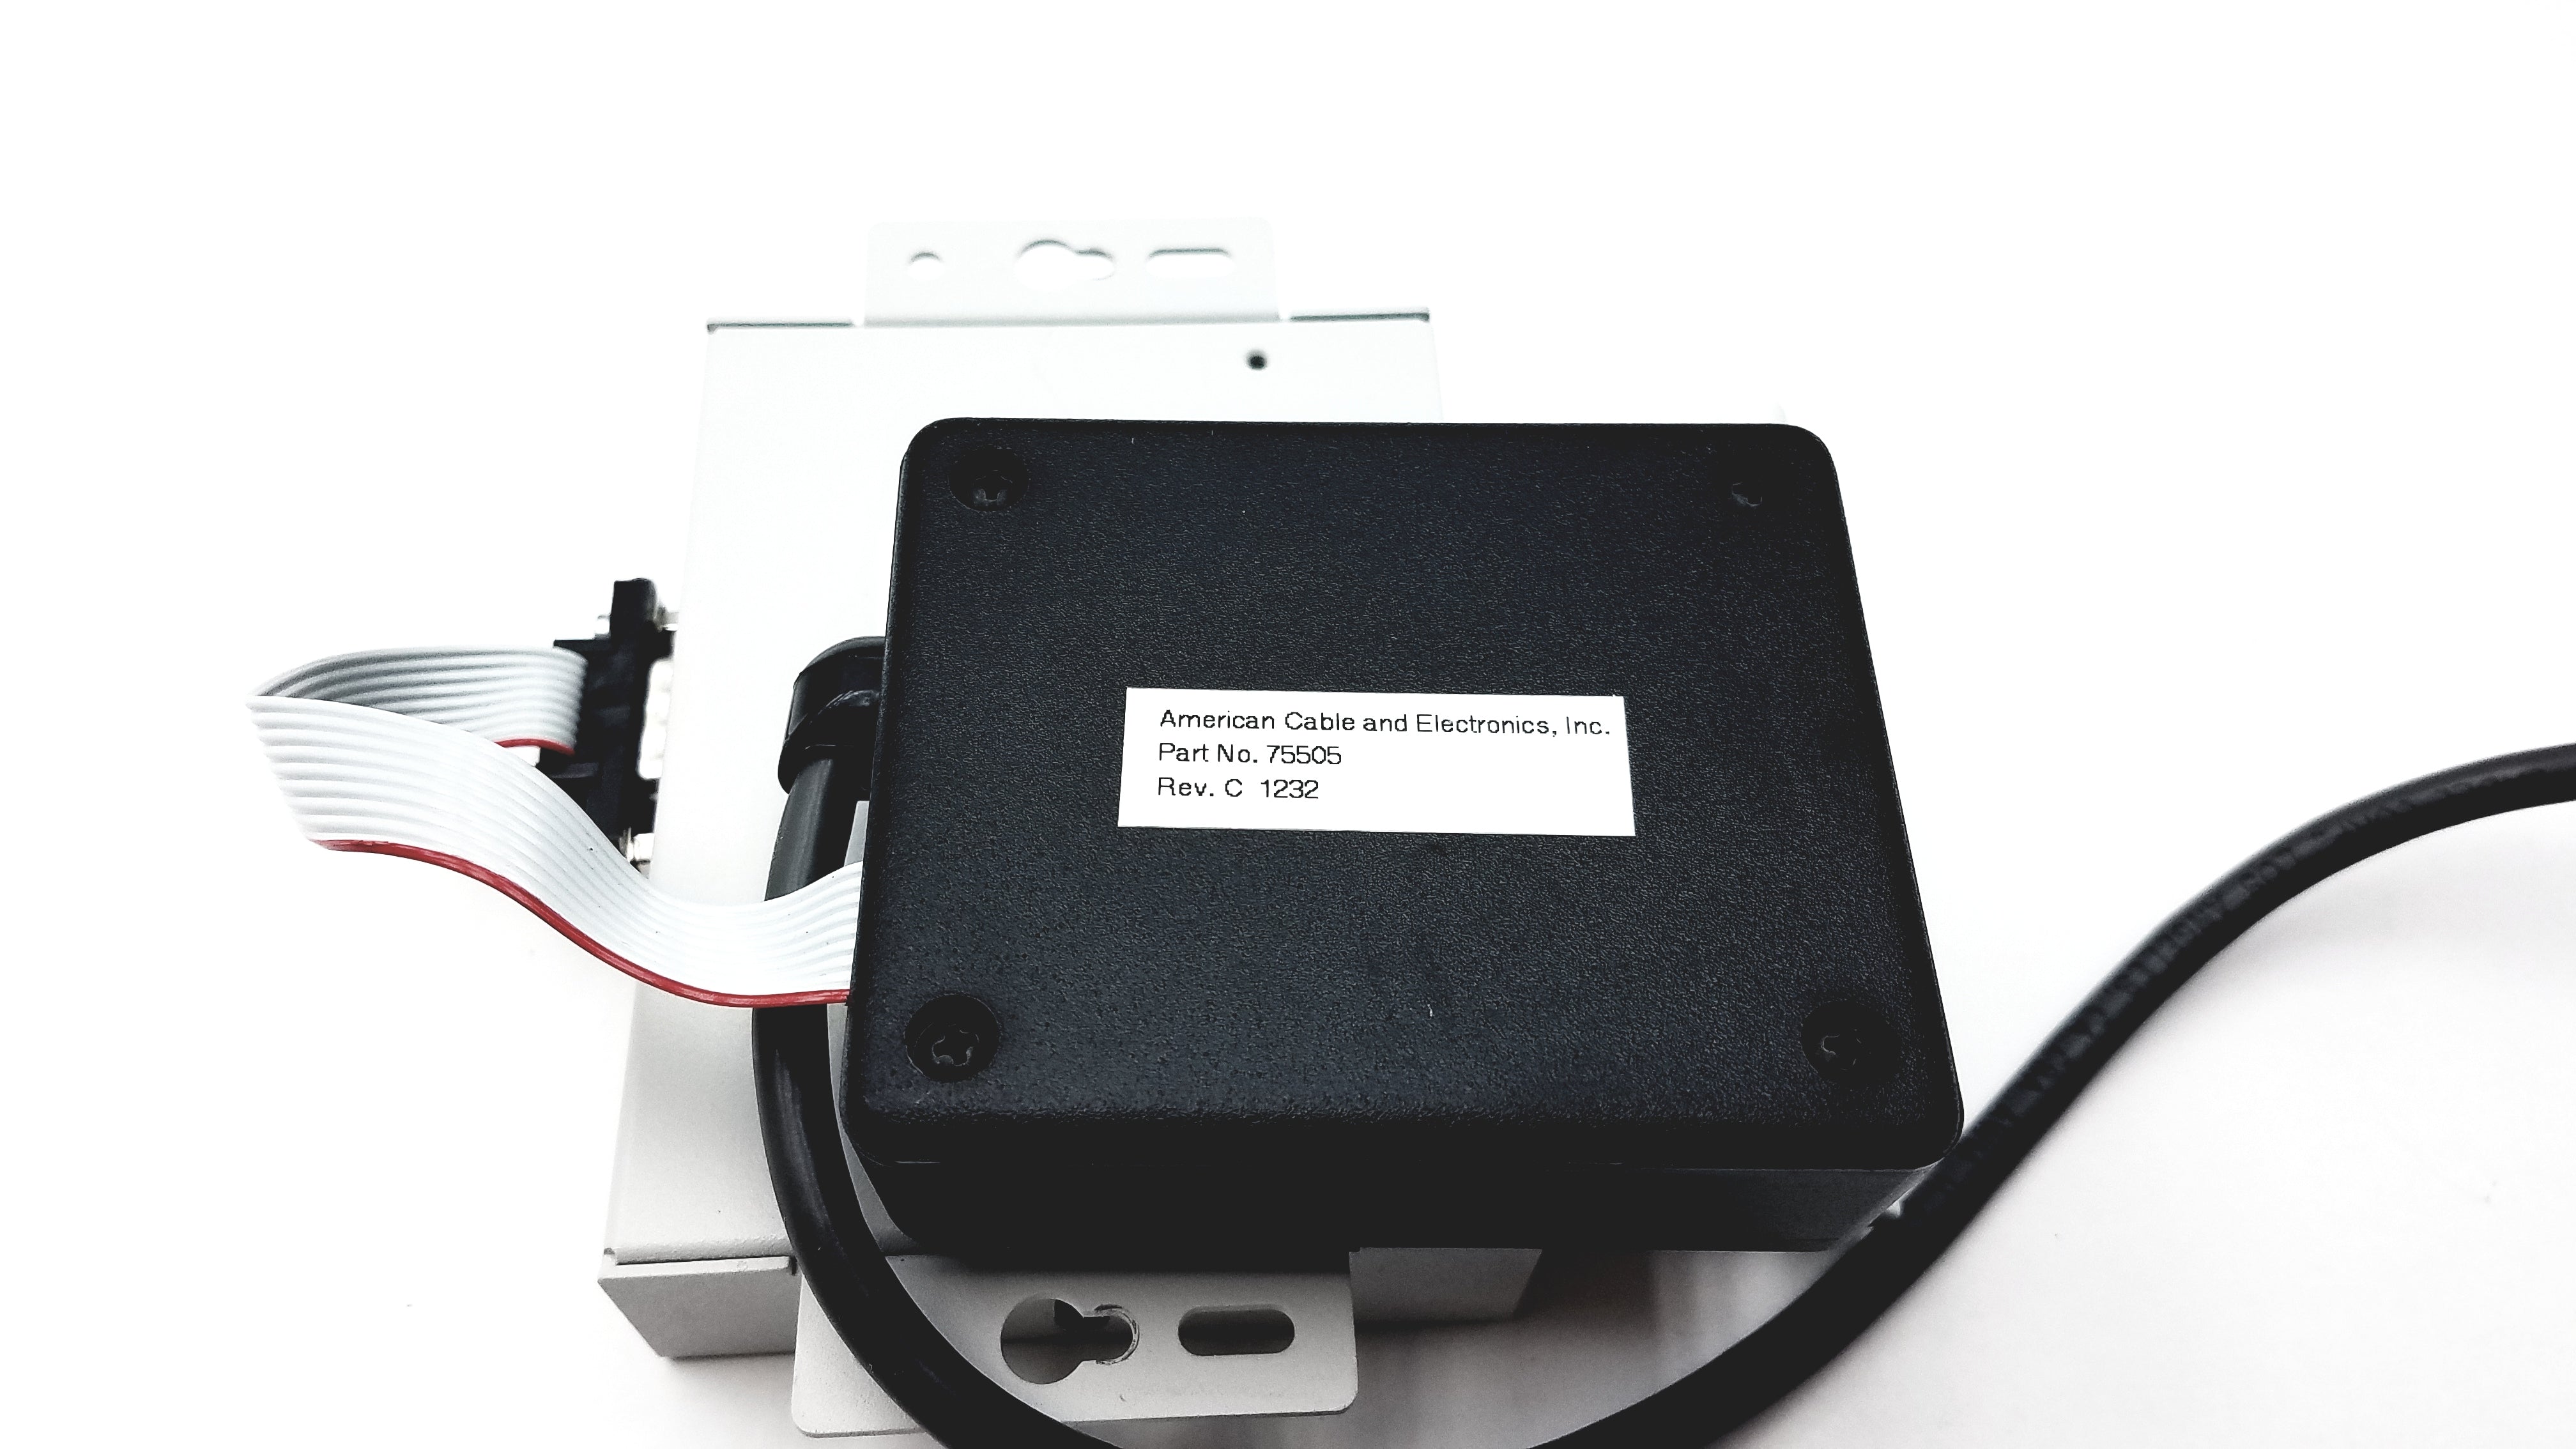 Load image into Gallery viewer, Silex SX-500 Wireless Serial Device Server